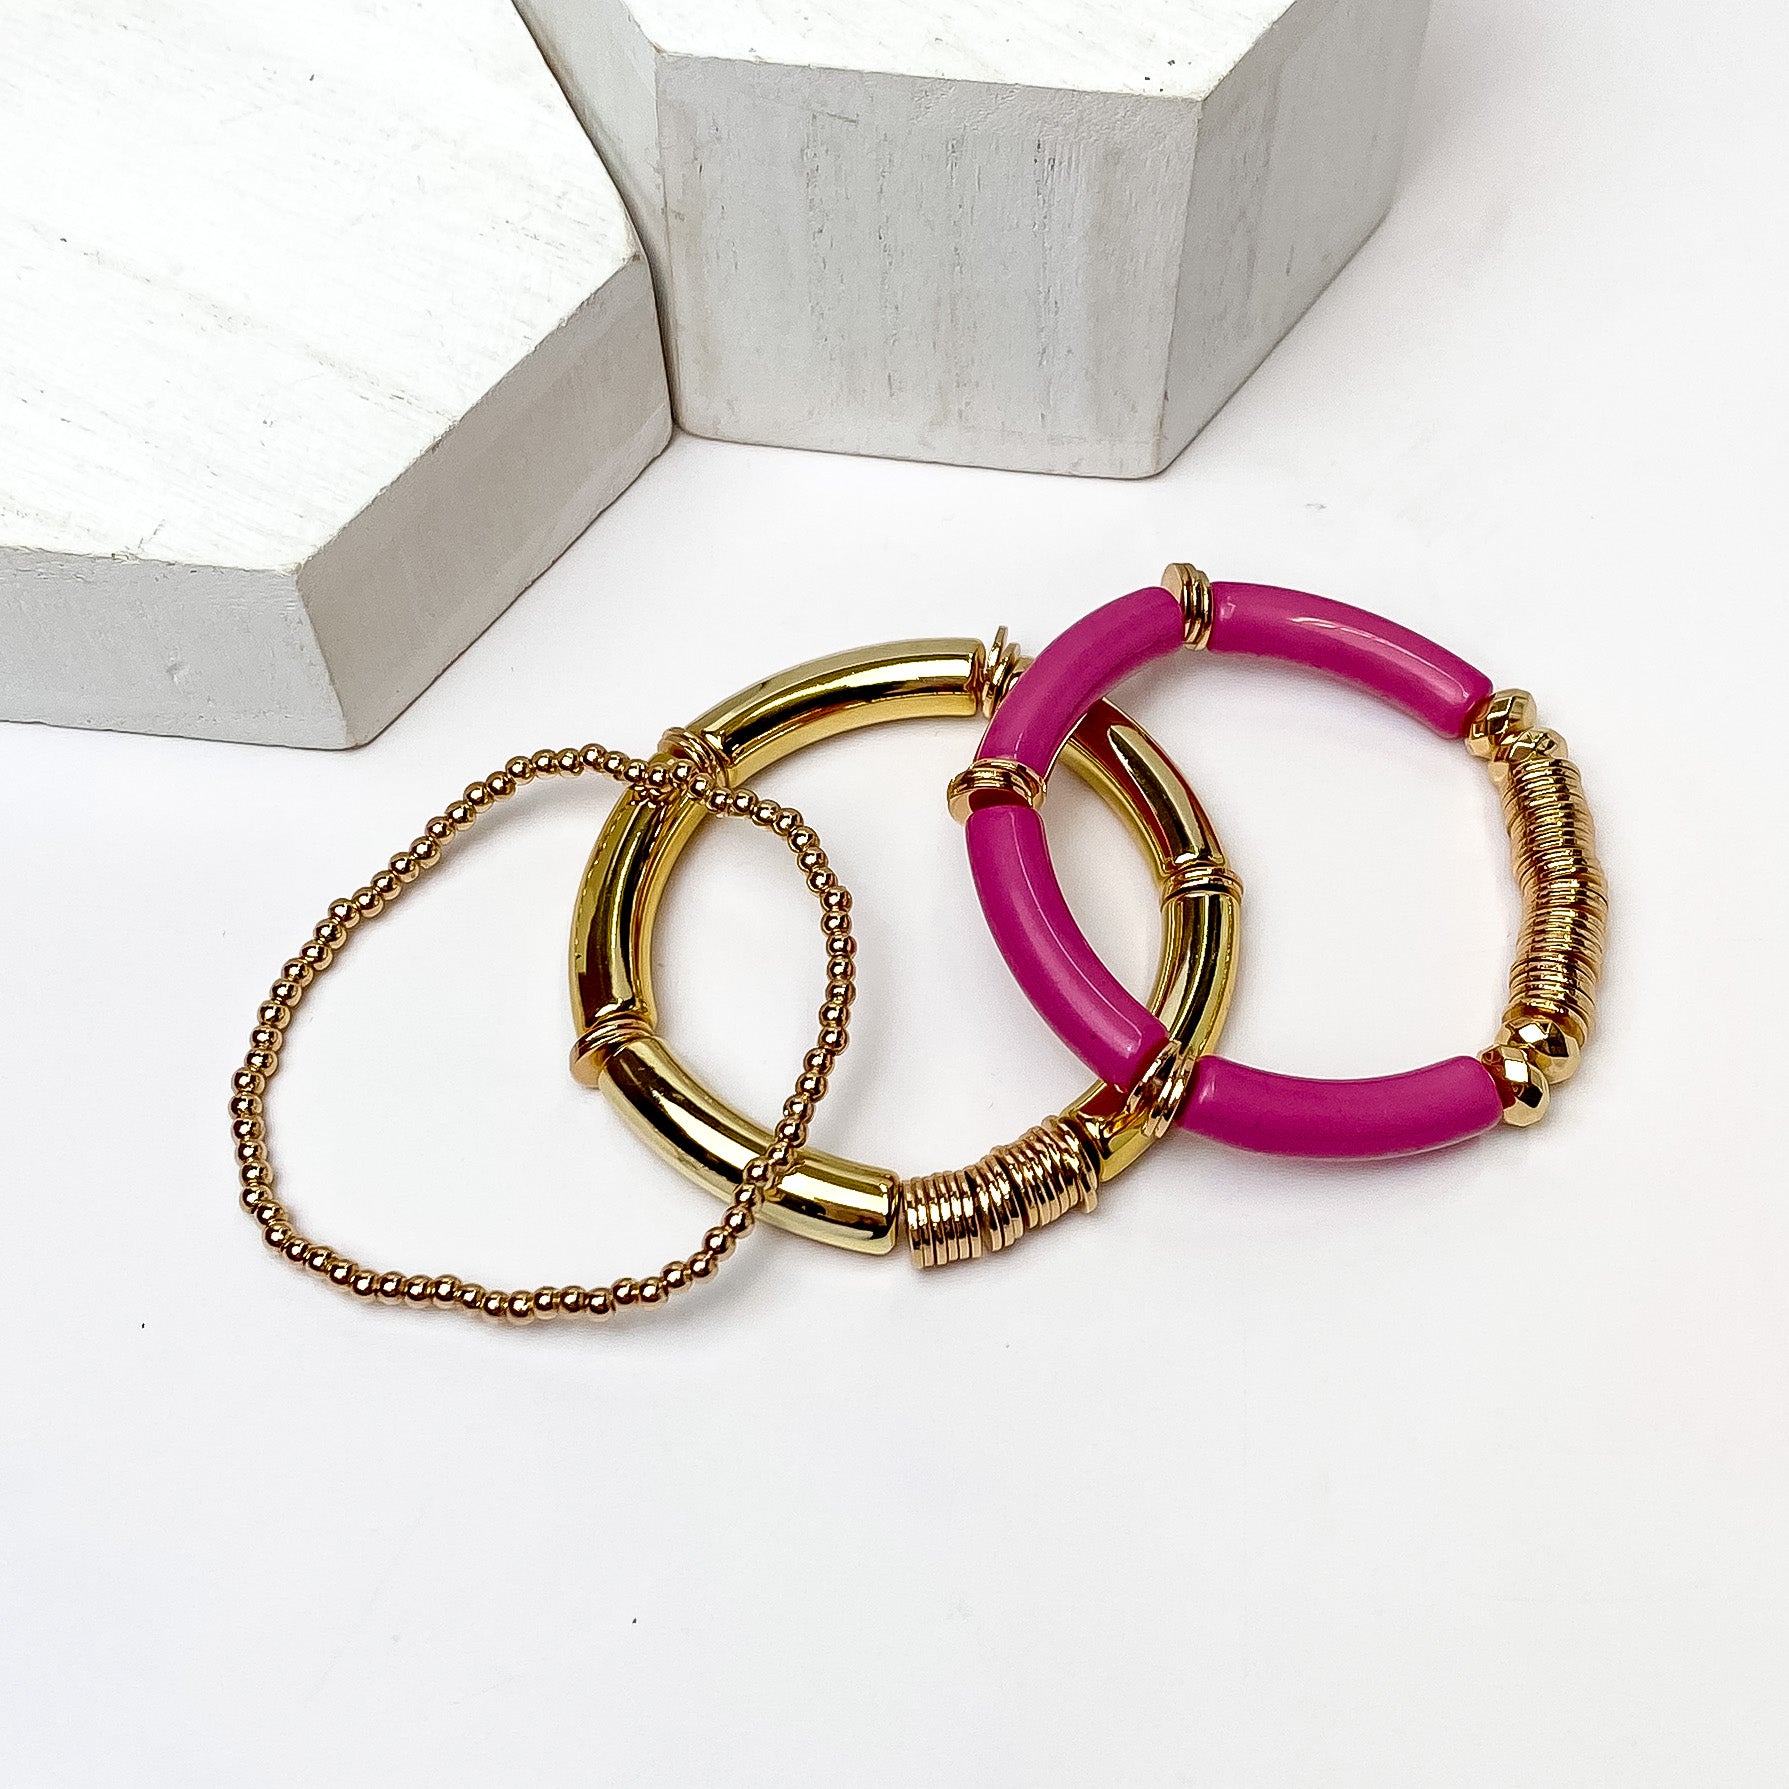 Set of Three | Bahama Nights Gold Tone Tube Bracelet Set in Purple. Pictured on a white background with white platforms above the bracelets.